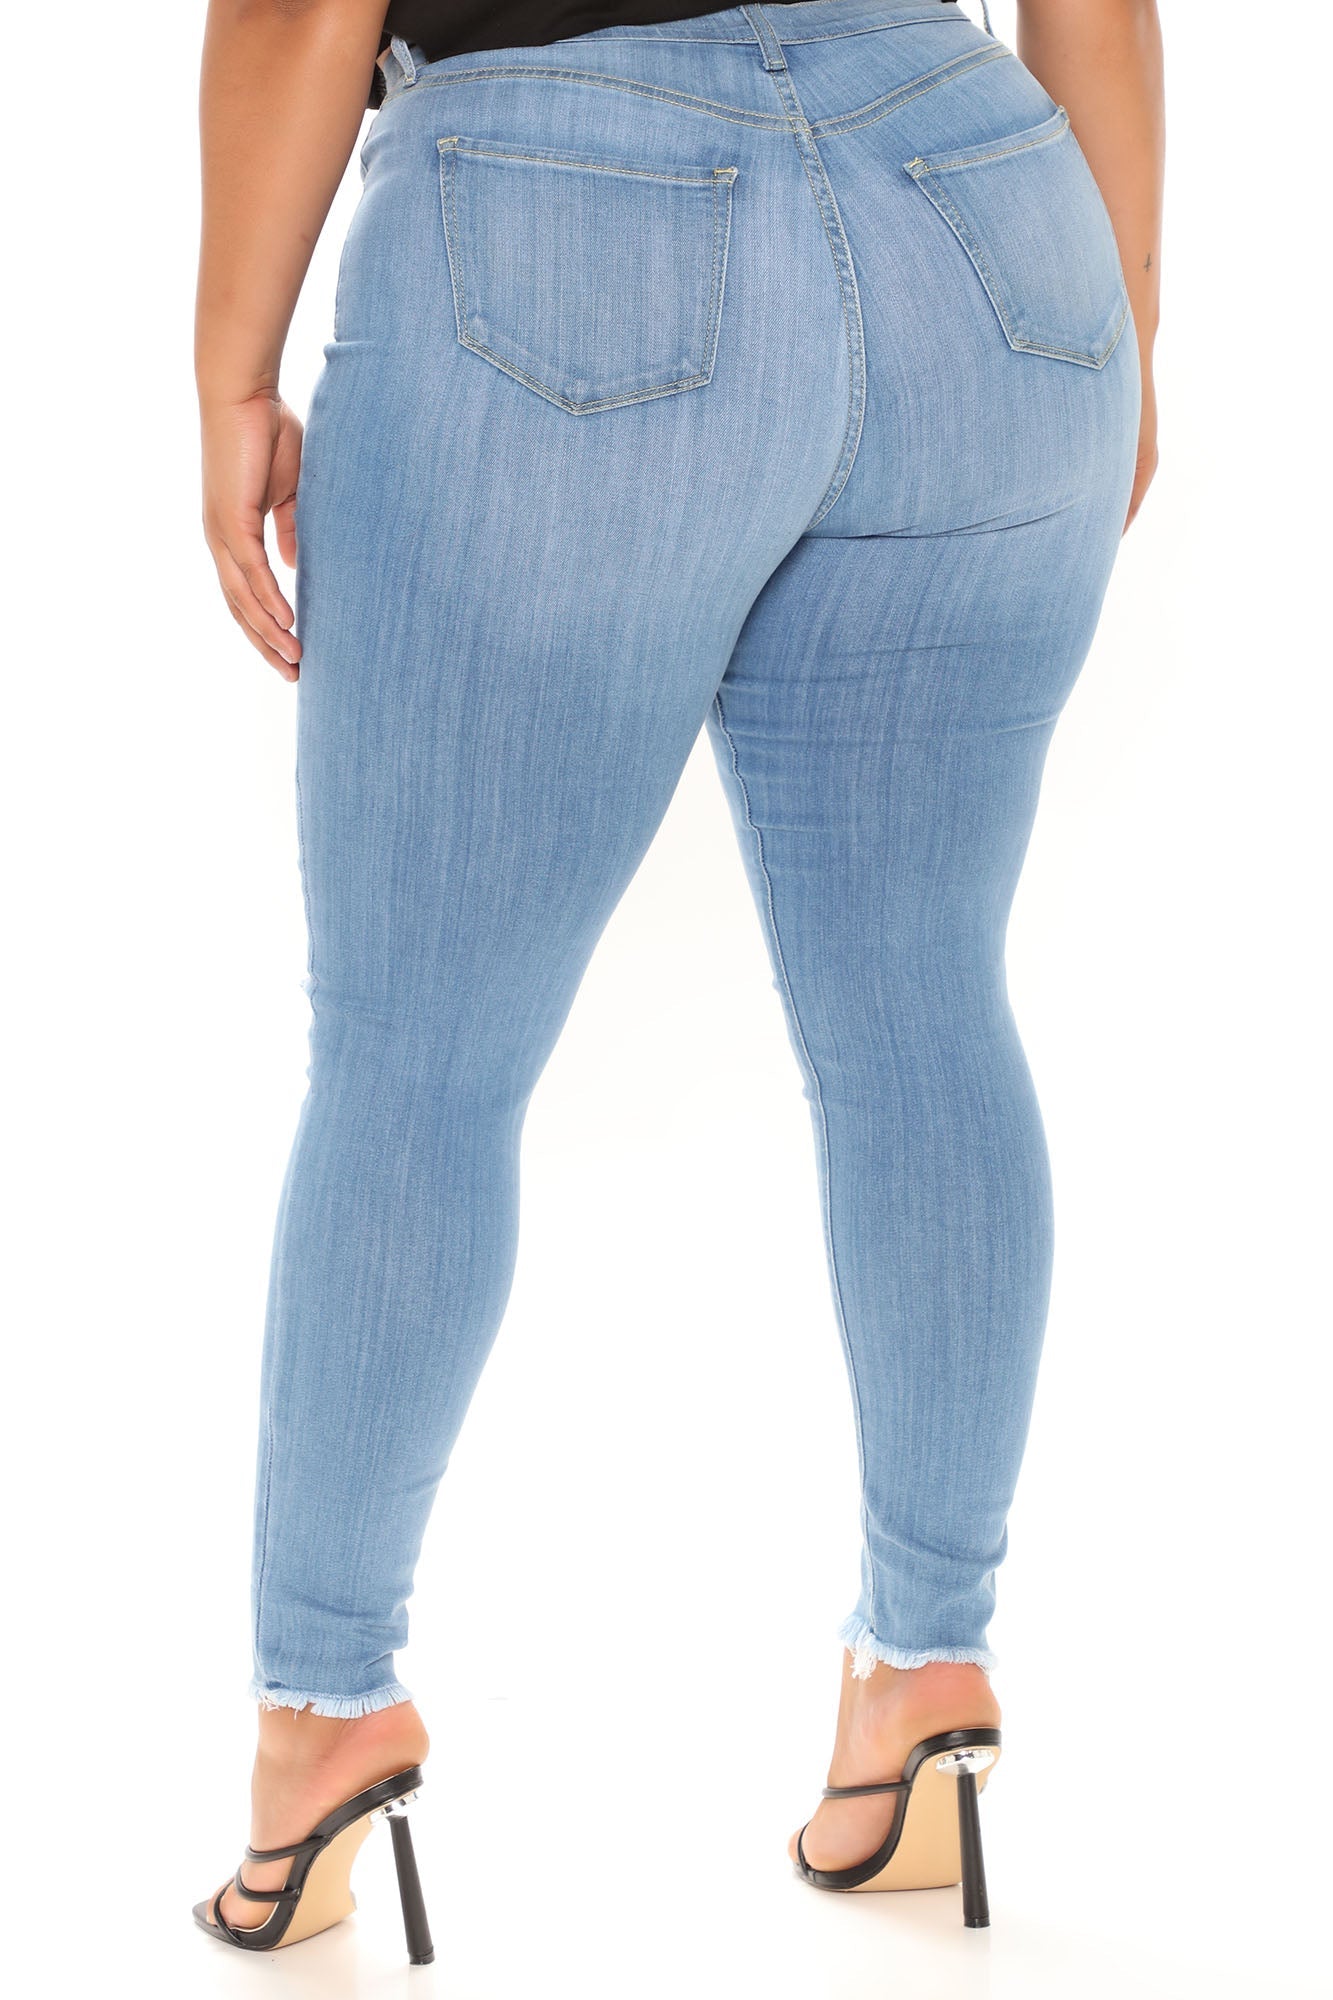 Out Of This World Luxe Stretch Skinny Jeans - Light Blue Wash